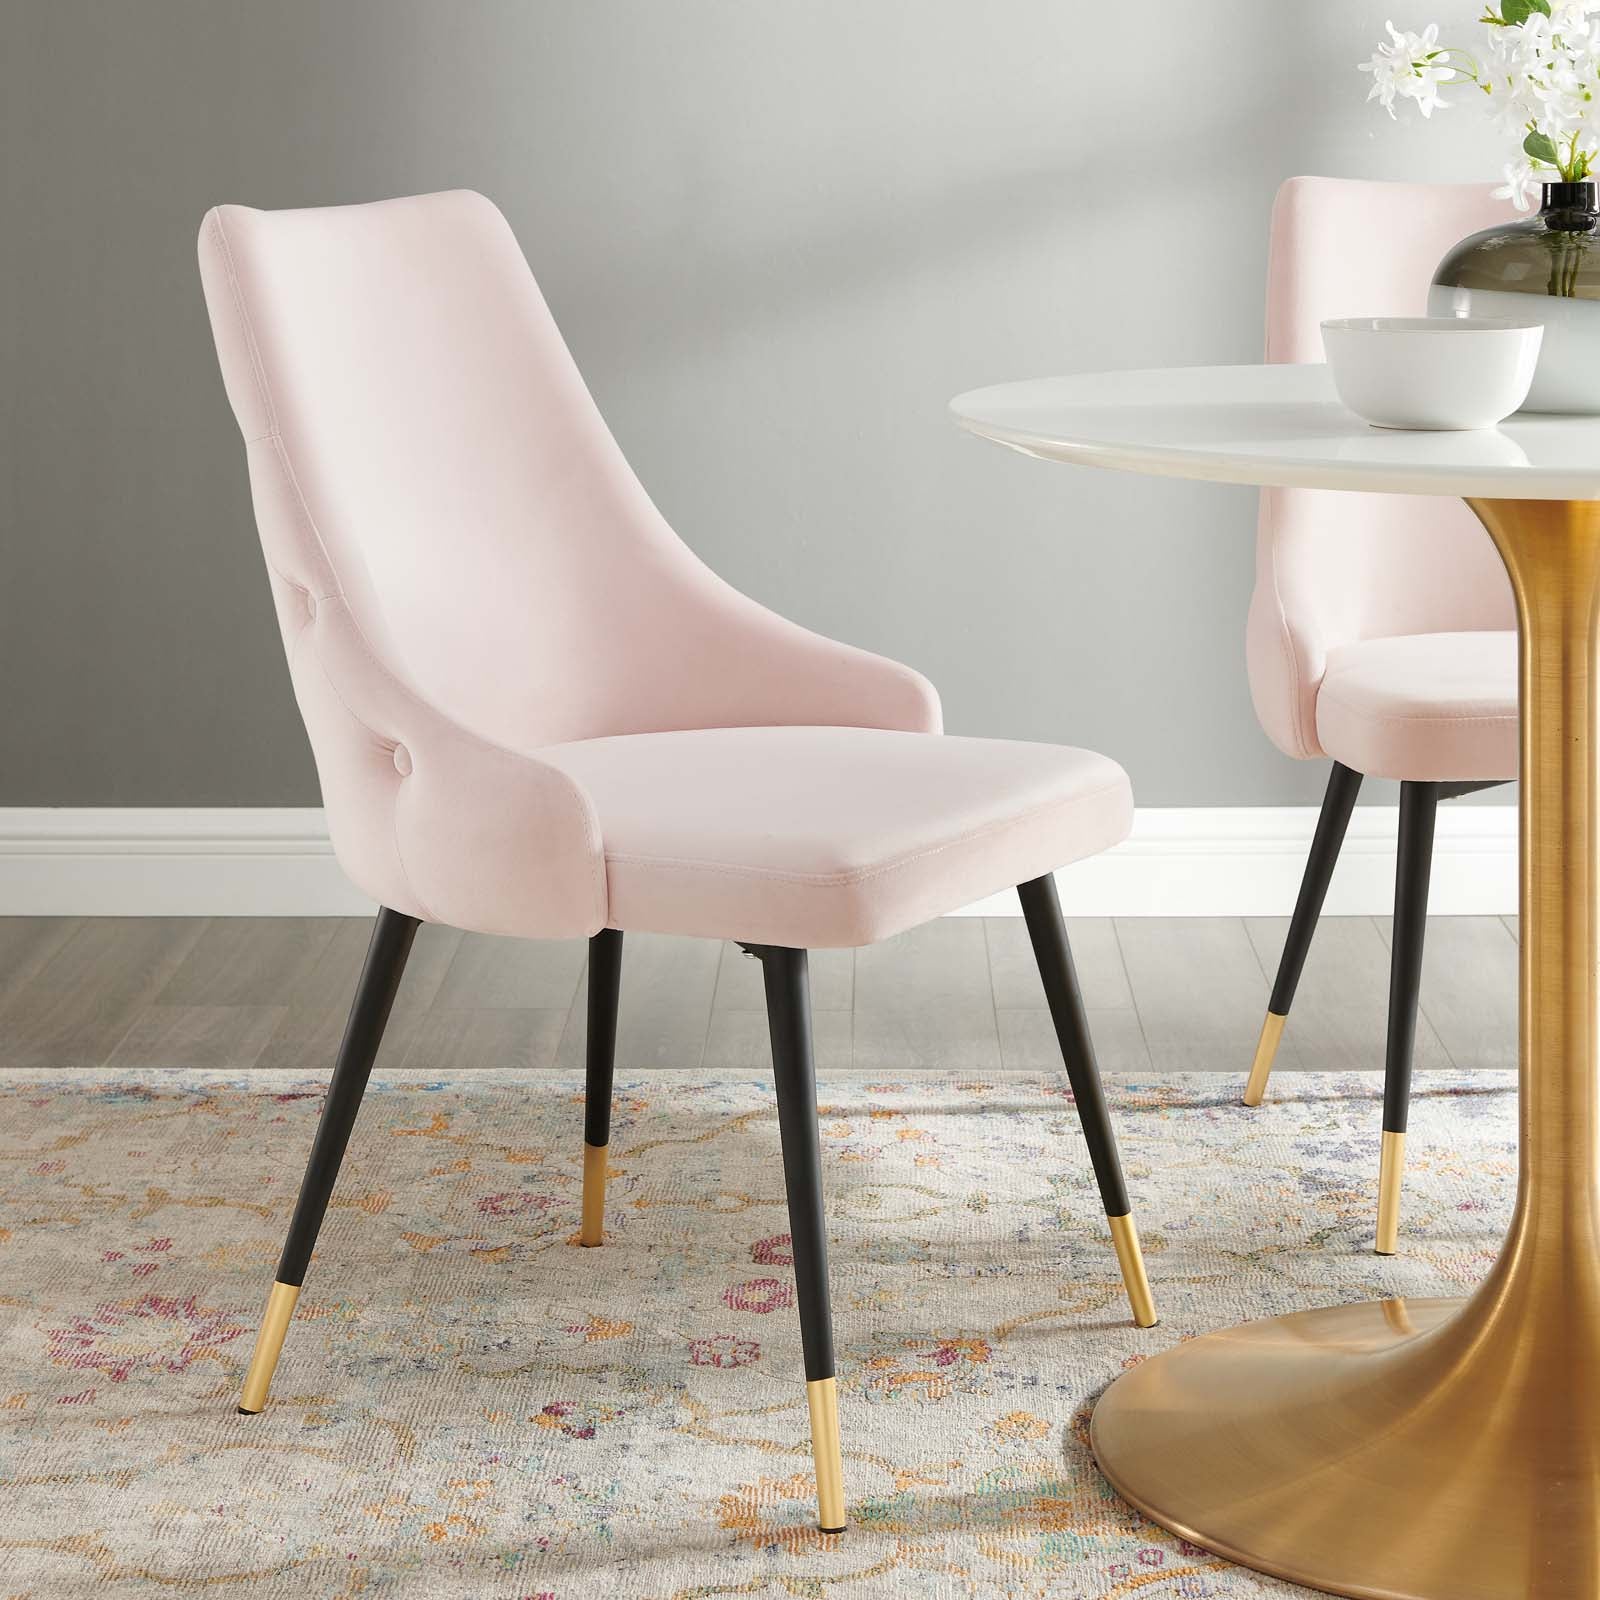 Modway Dining Chairs - Adorn Tufted Performance Velvet Dining Side Chair Pink